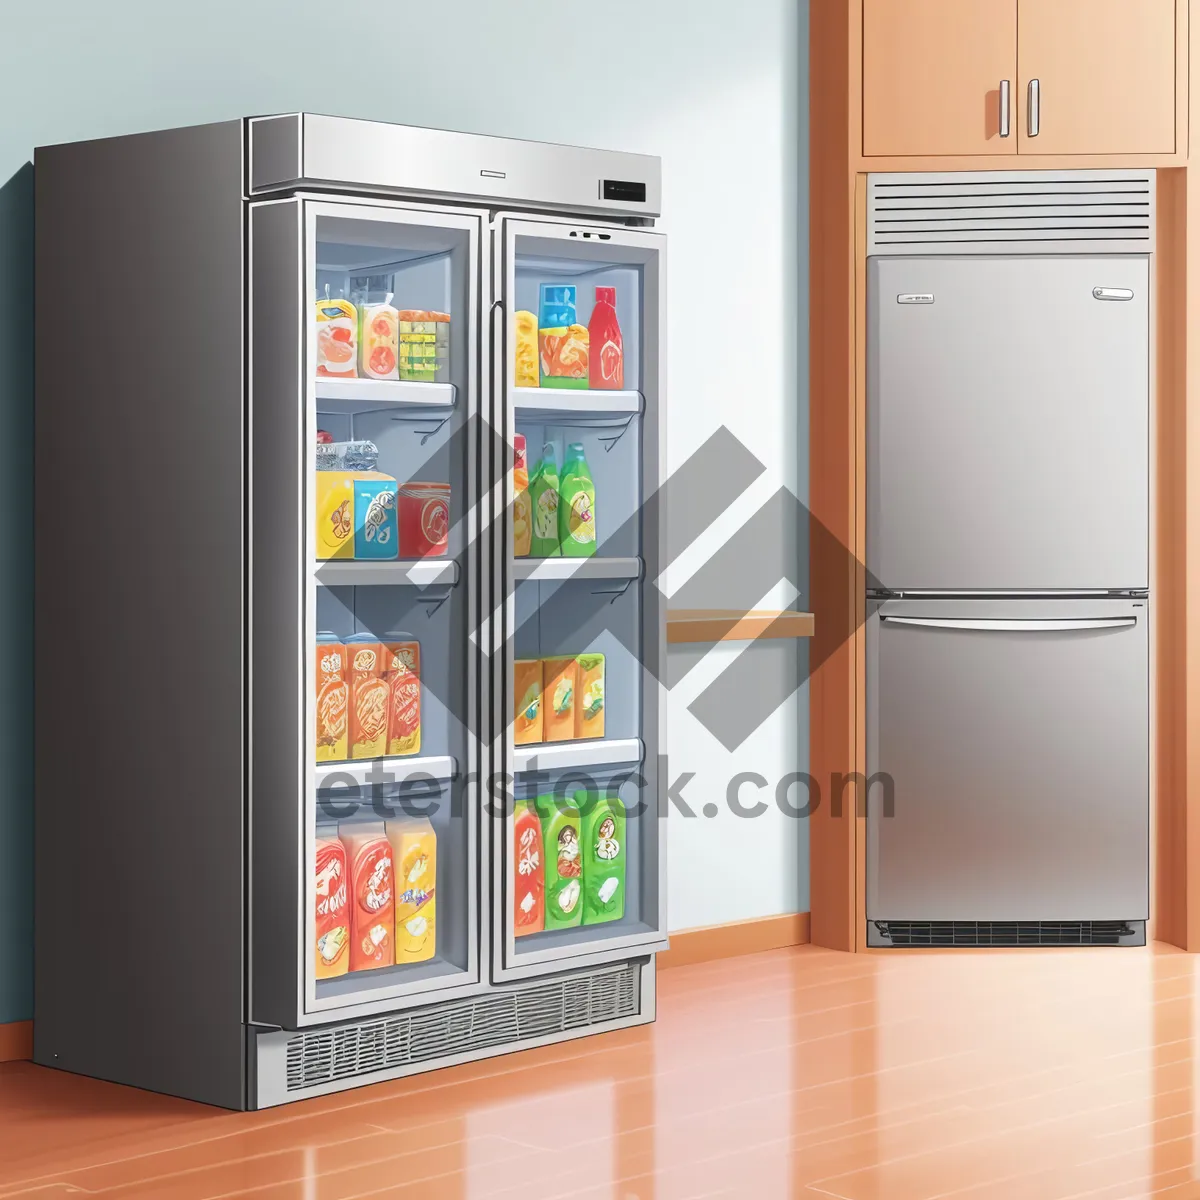 Picture of Modern White Goods Refrigerator with Open Door